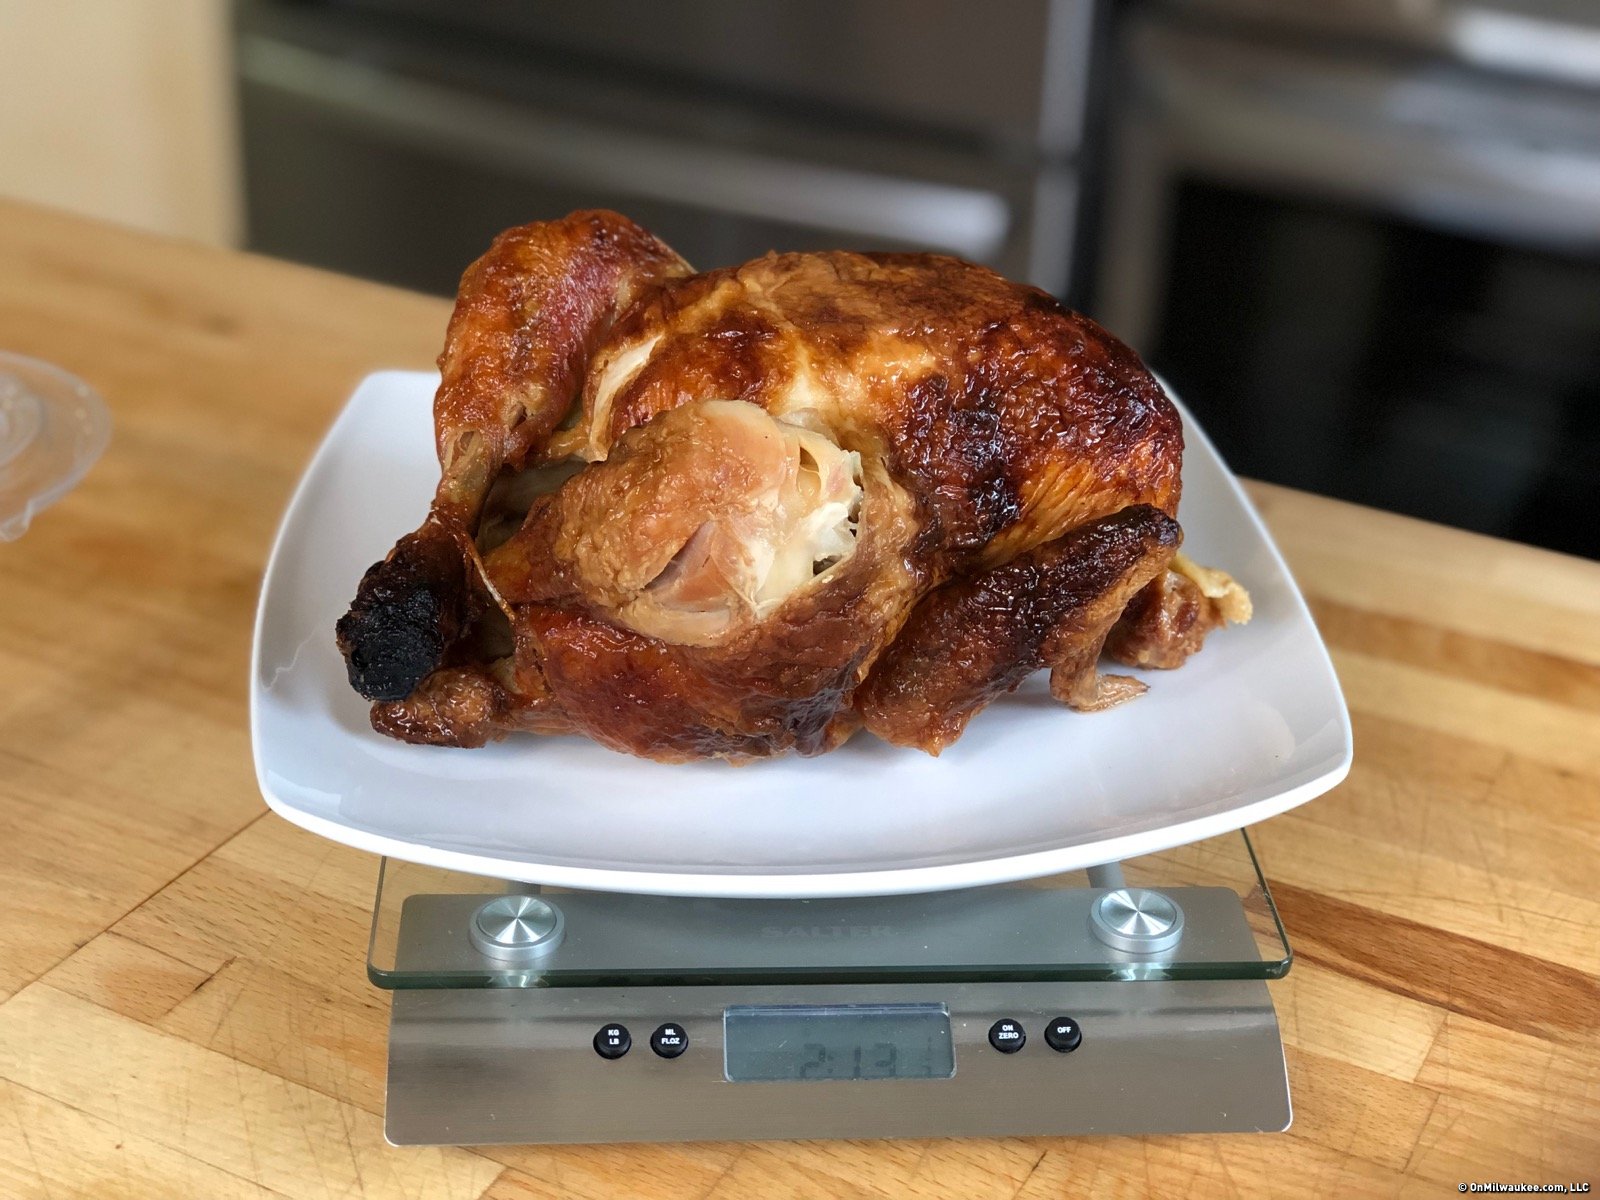 Fair Game Or Fowl Play 8 Grocery Store Rotisserie Chickens Reviewed And Ranked